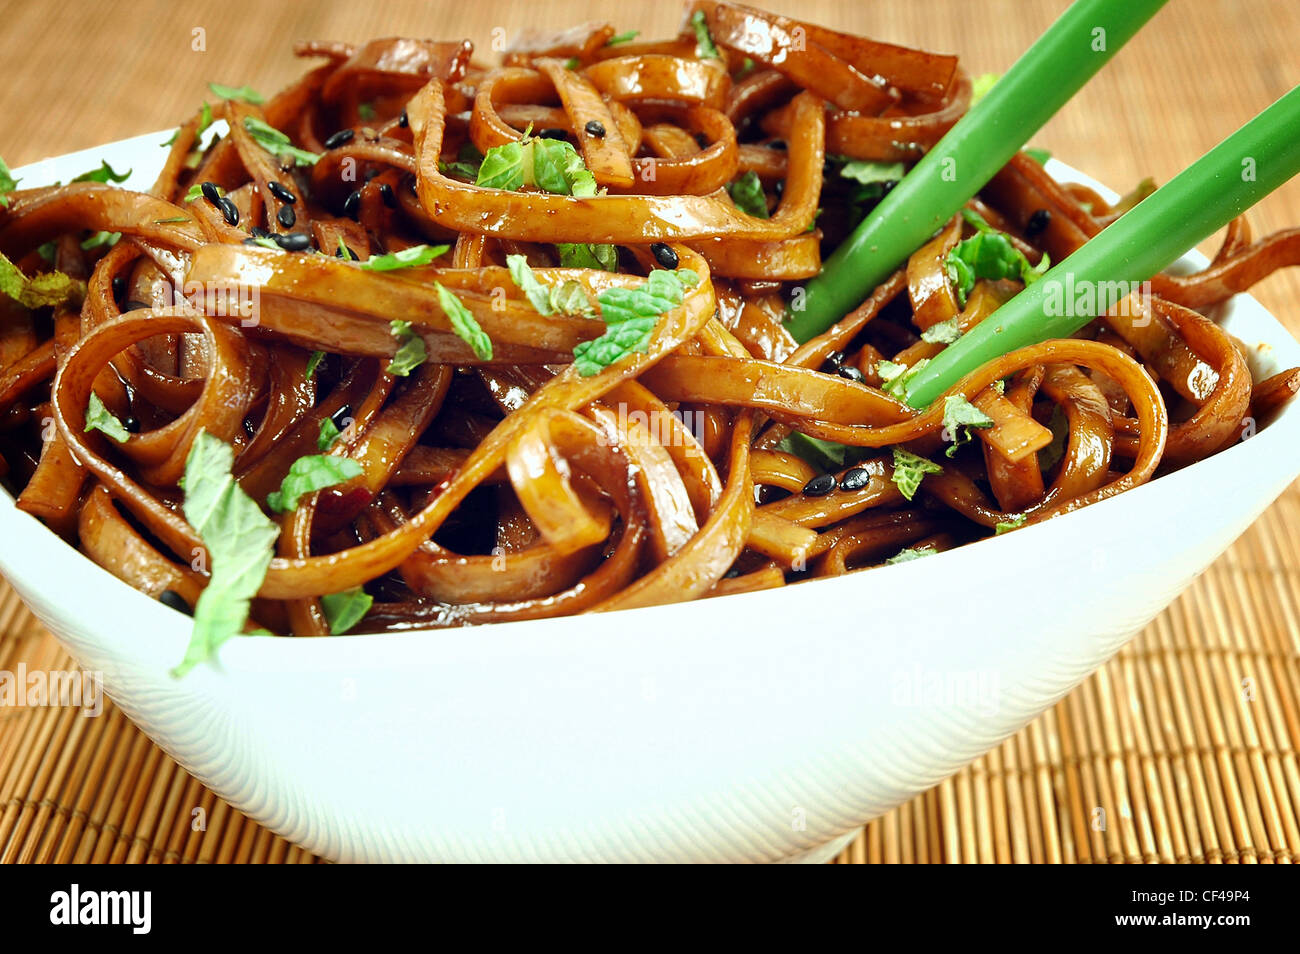 Bowl of stir fried udon noodles garnished with black sesame seeds and fresh mint with green chopsticks Stock Photo